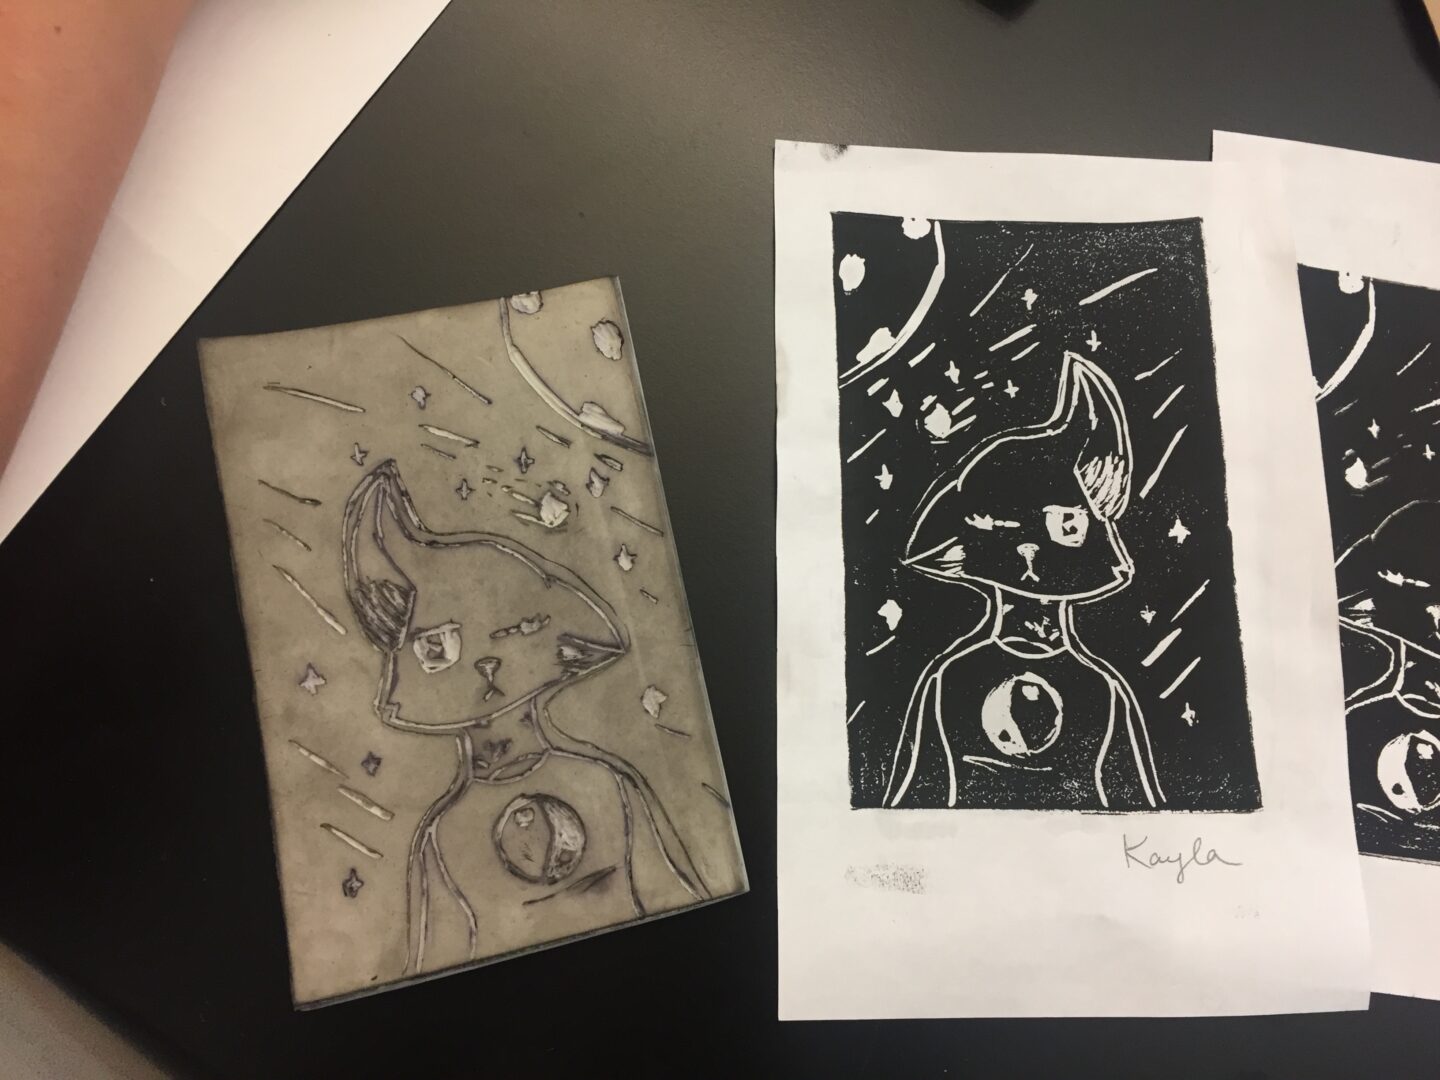 Two pieces of paper with a drawing on them.